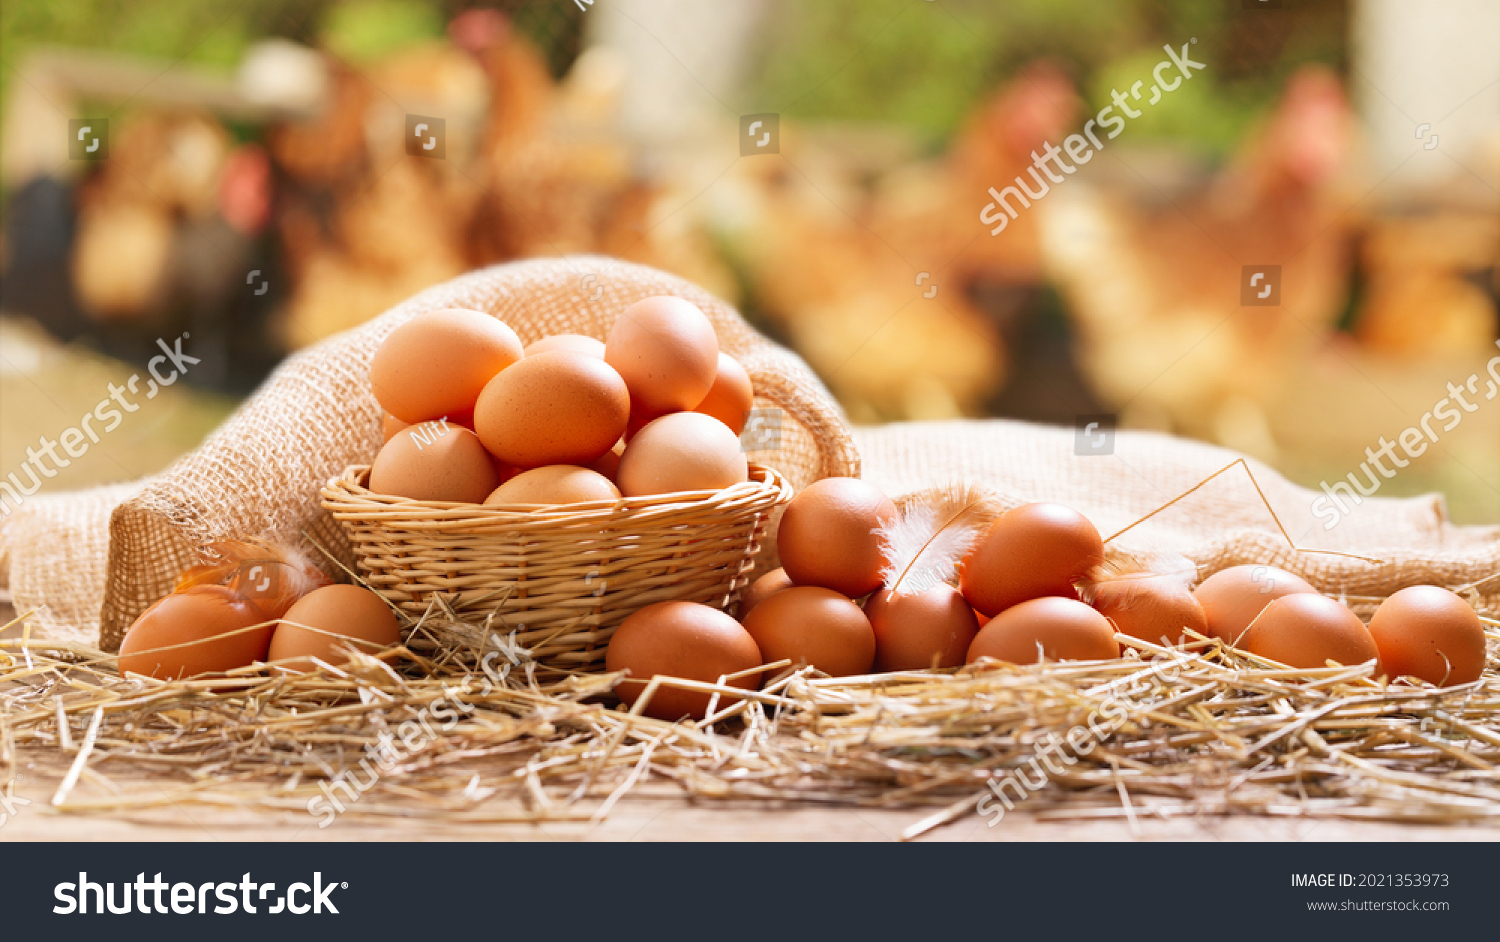 basket of chicken eggs on a wooden table over farm in the countryside #2021353973